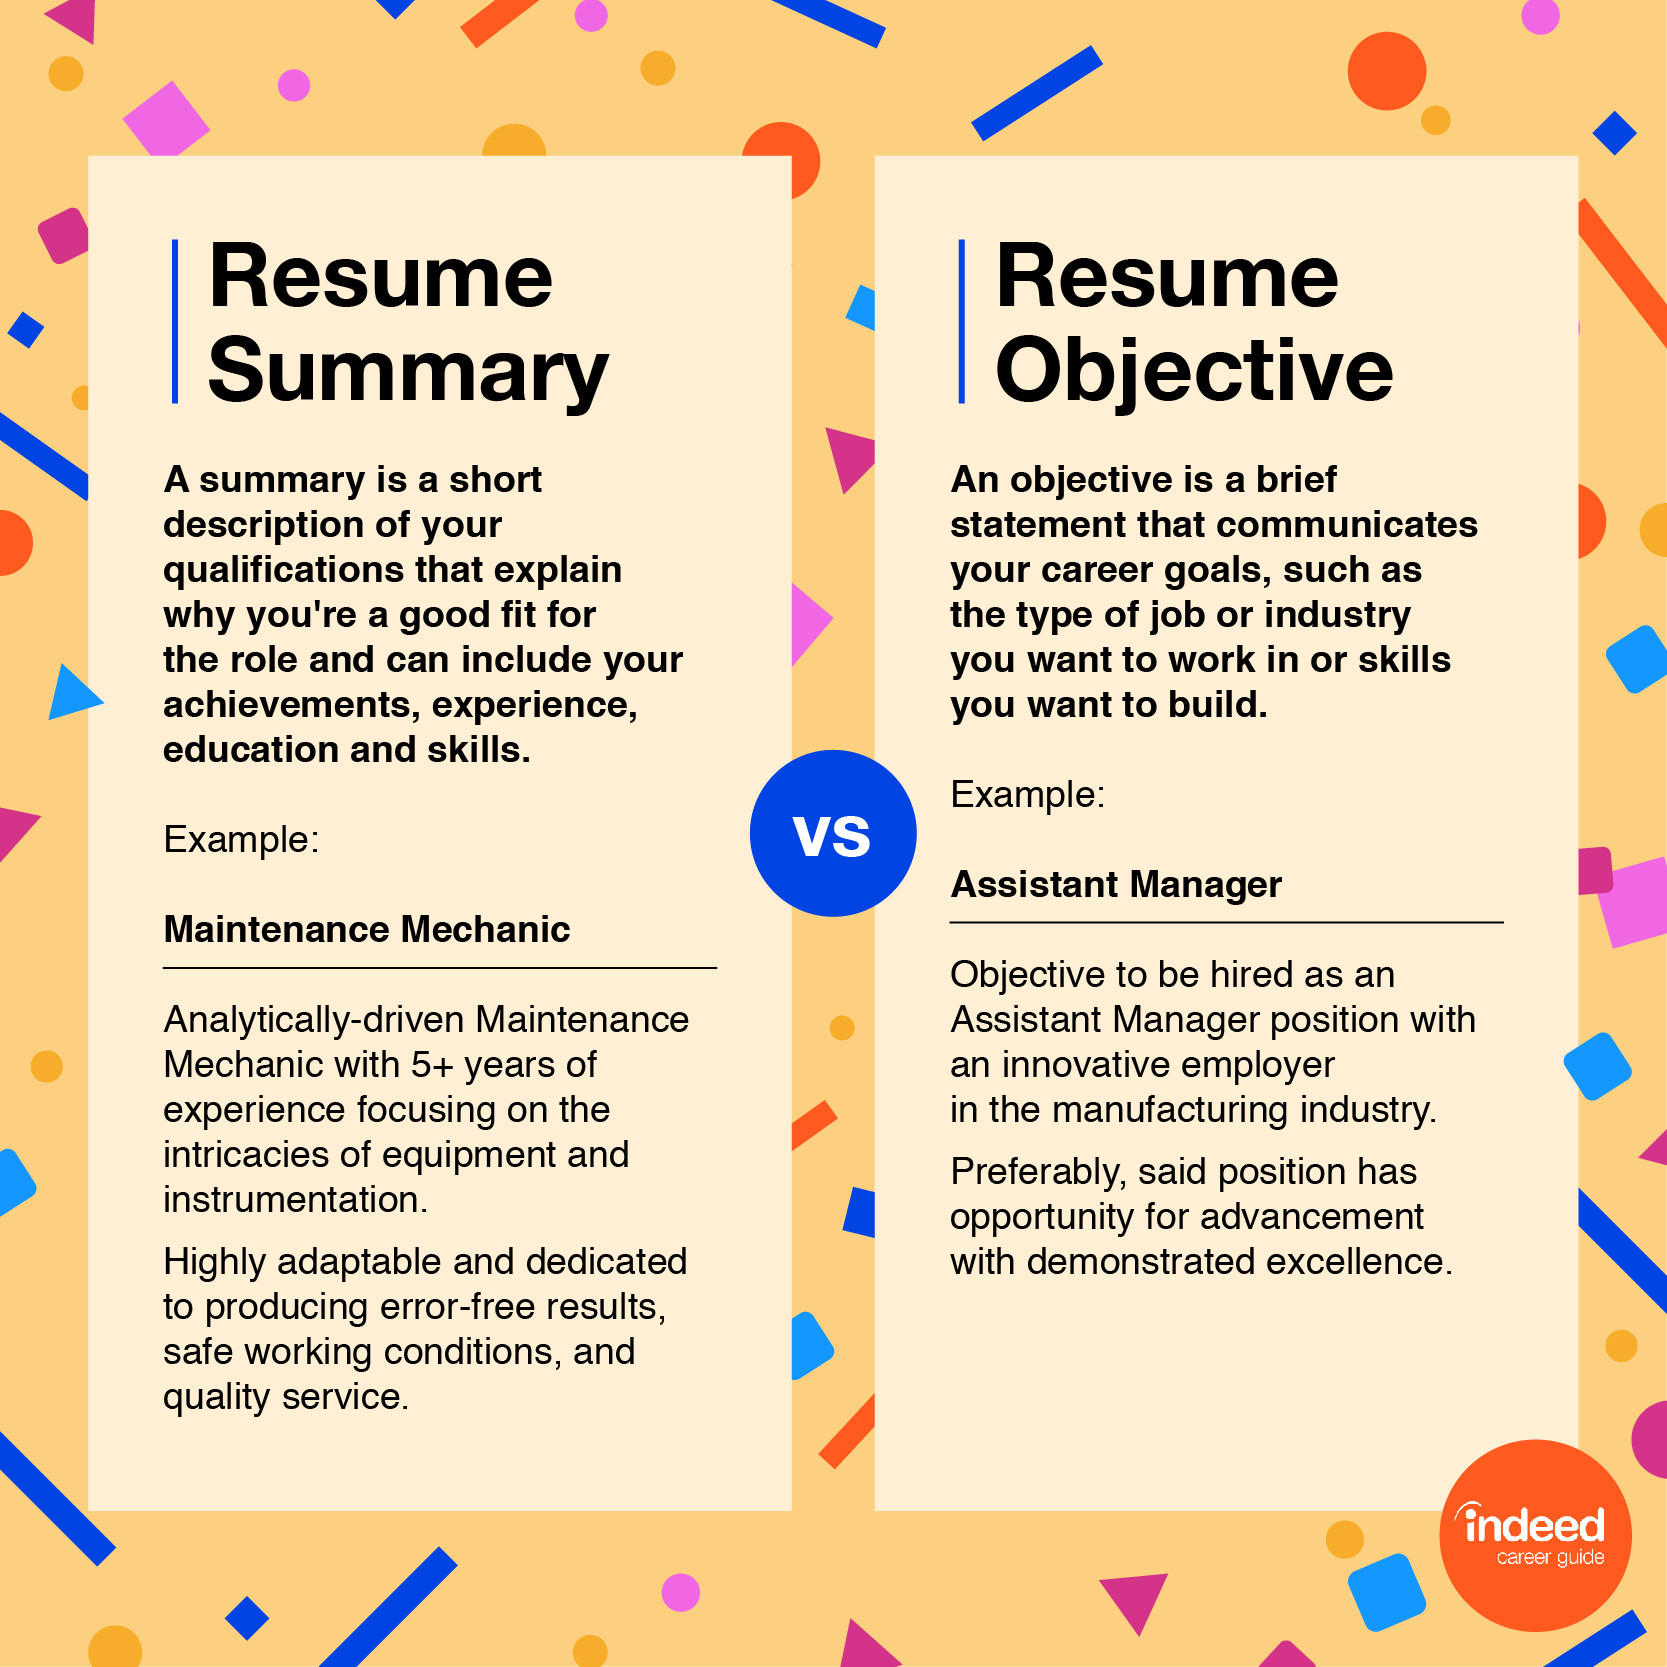 Sample Resume Objective Statements for Student 70lancarrezekiq Resume Objective Examples (with Tips and How-to Guide …